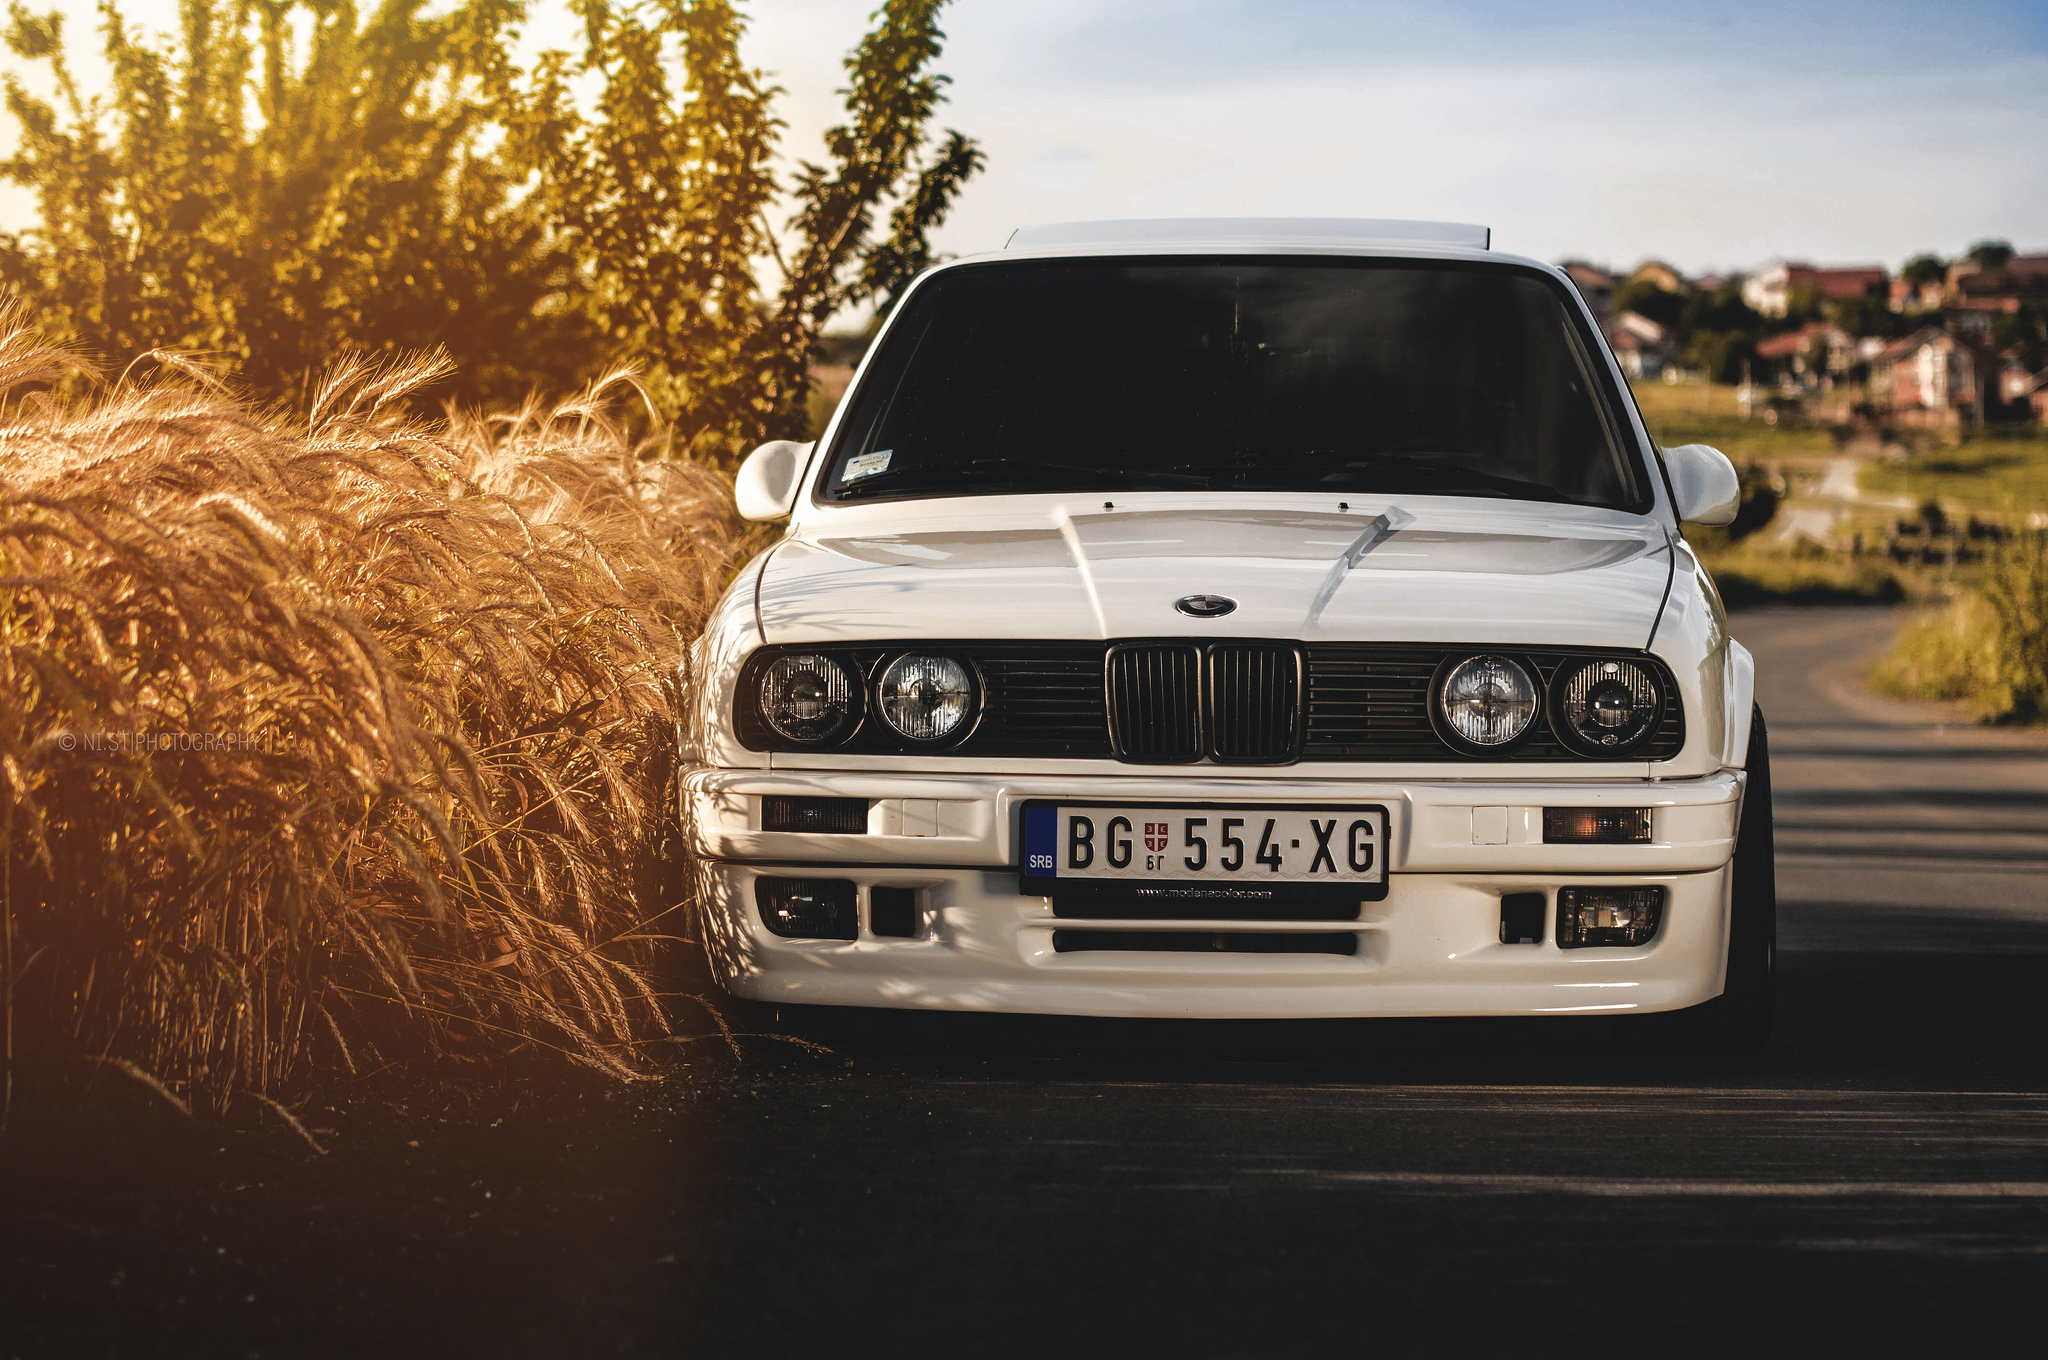 70927 download wallpaper cars, white, bmw, auto, 325i, e30 screensavers and pictures for free